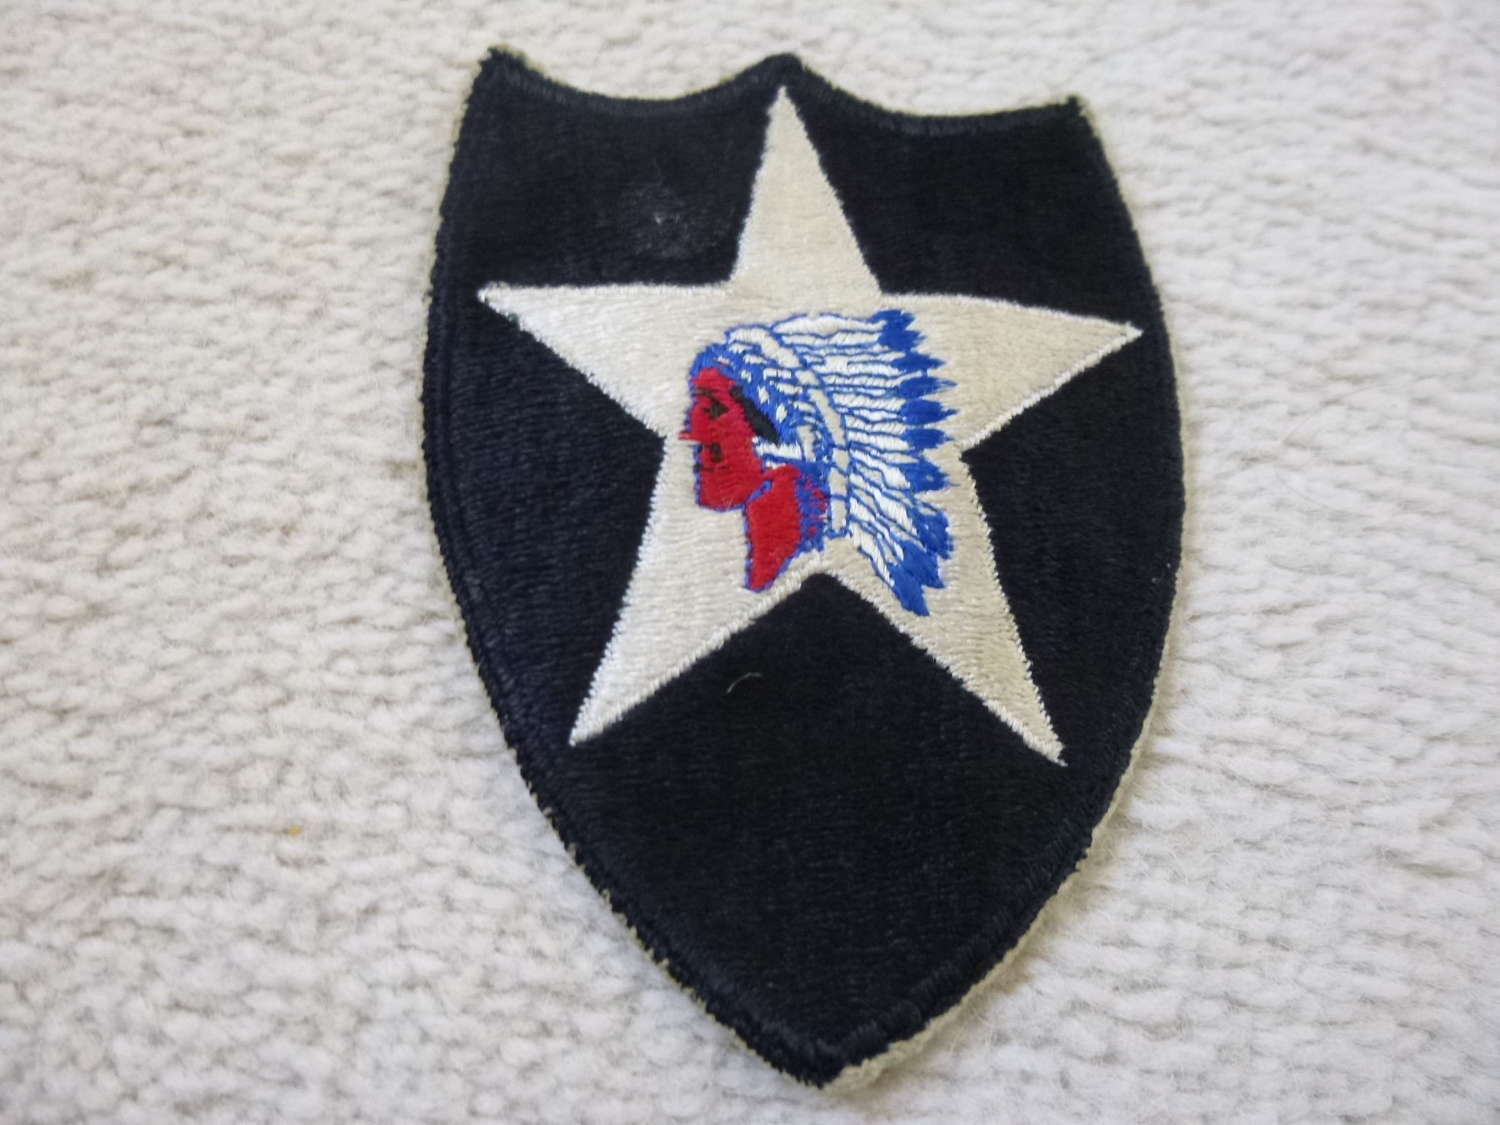 US army 2nd infantry division patch